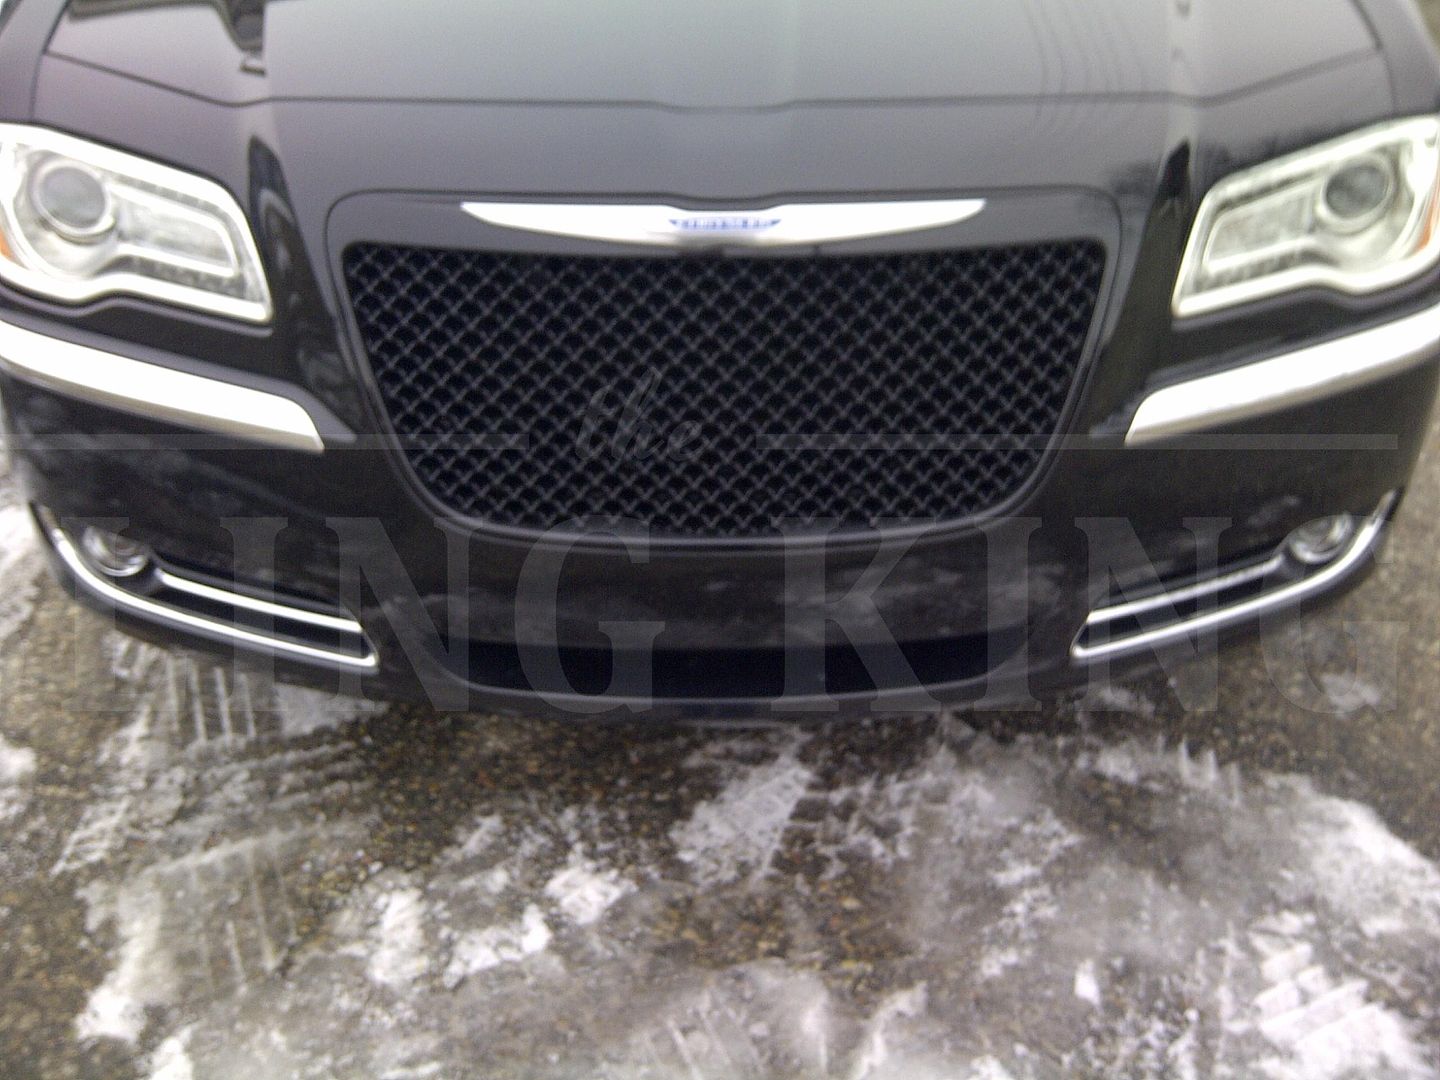  photo 2011_2012_2013_Chrysler_300_chrome_bentley_mesh_grill_grille_black_chrome_replacement_abs_grille_zps66ca3ab6.jpg